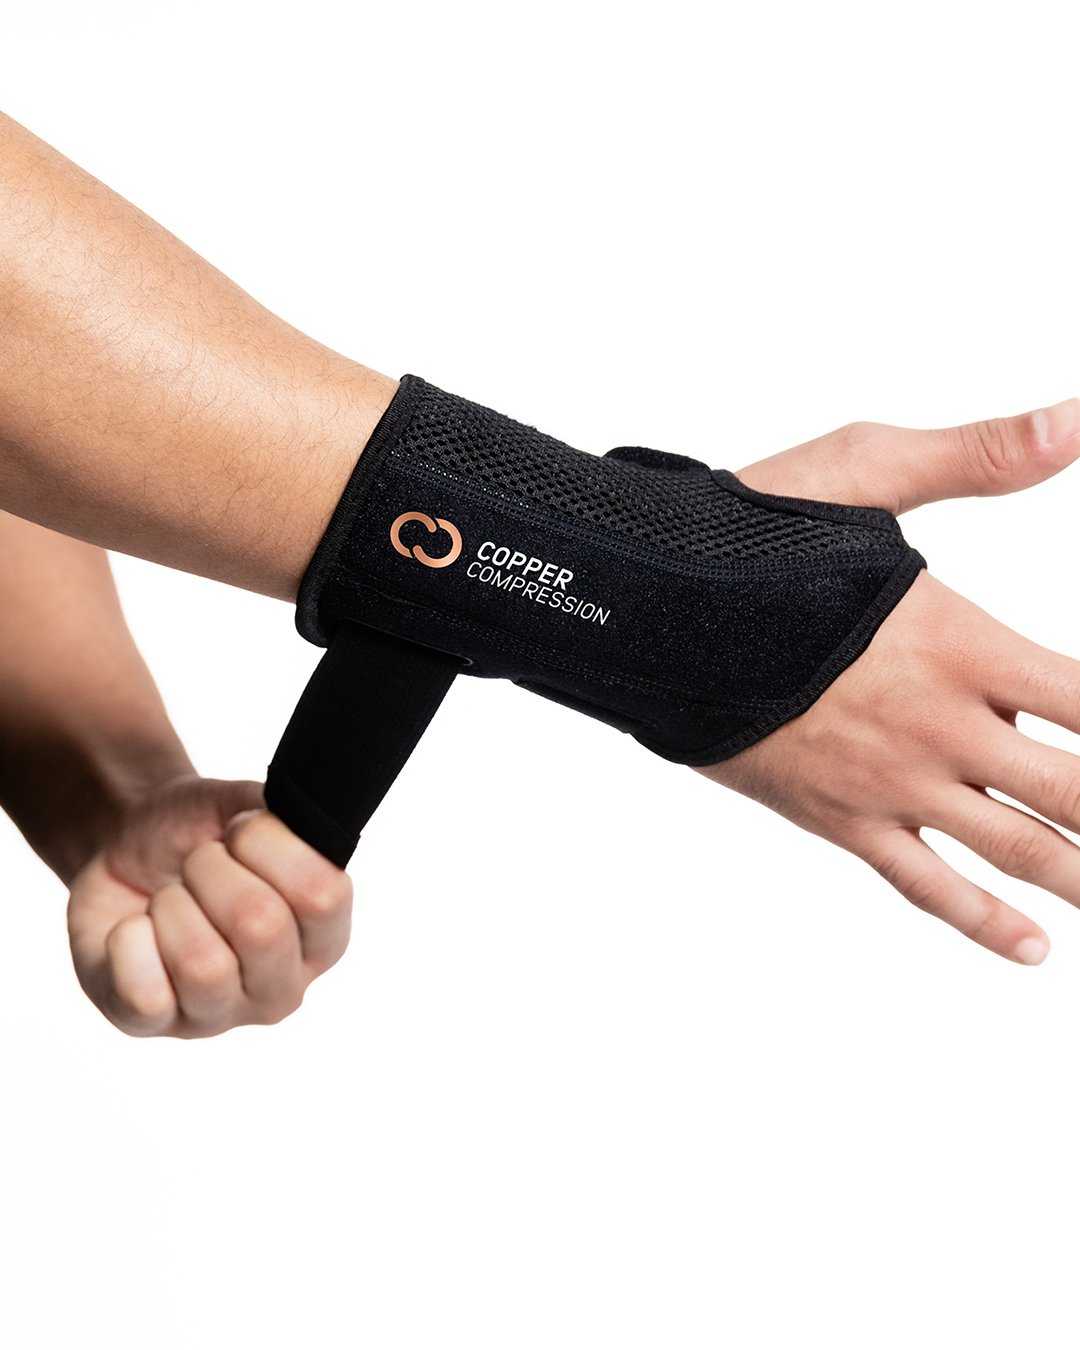 Copper Compression Hand And Wrist Sleeves Brace Support For Men & Women -  Pain Relief, Injury Recovery, Suitable For Sports Protection (1pcs, Black)